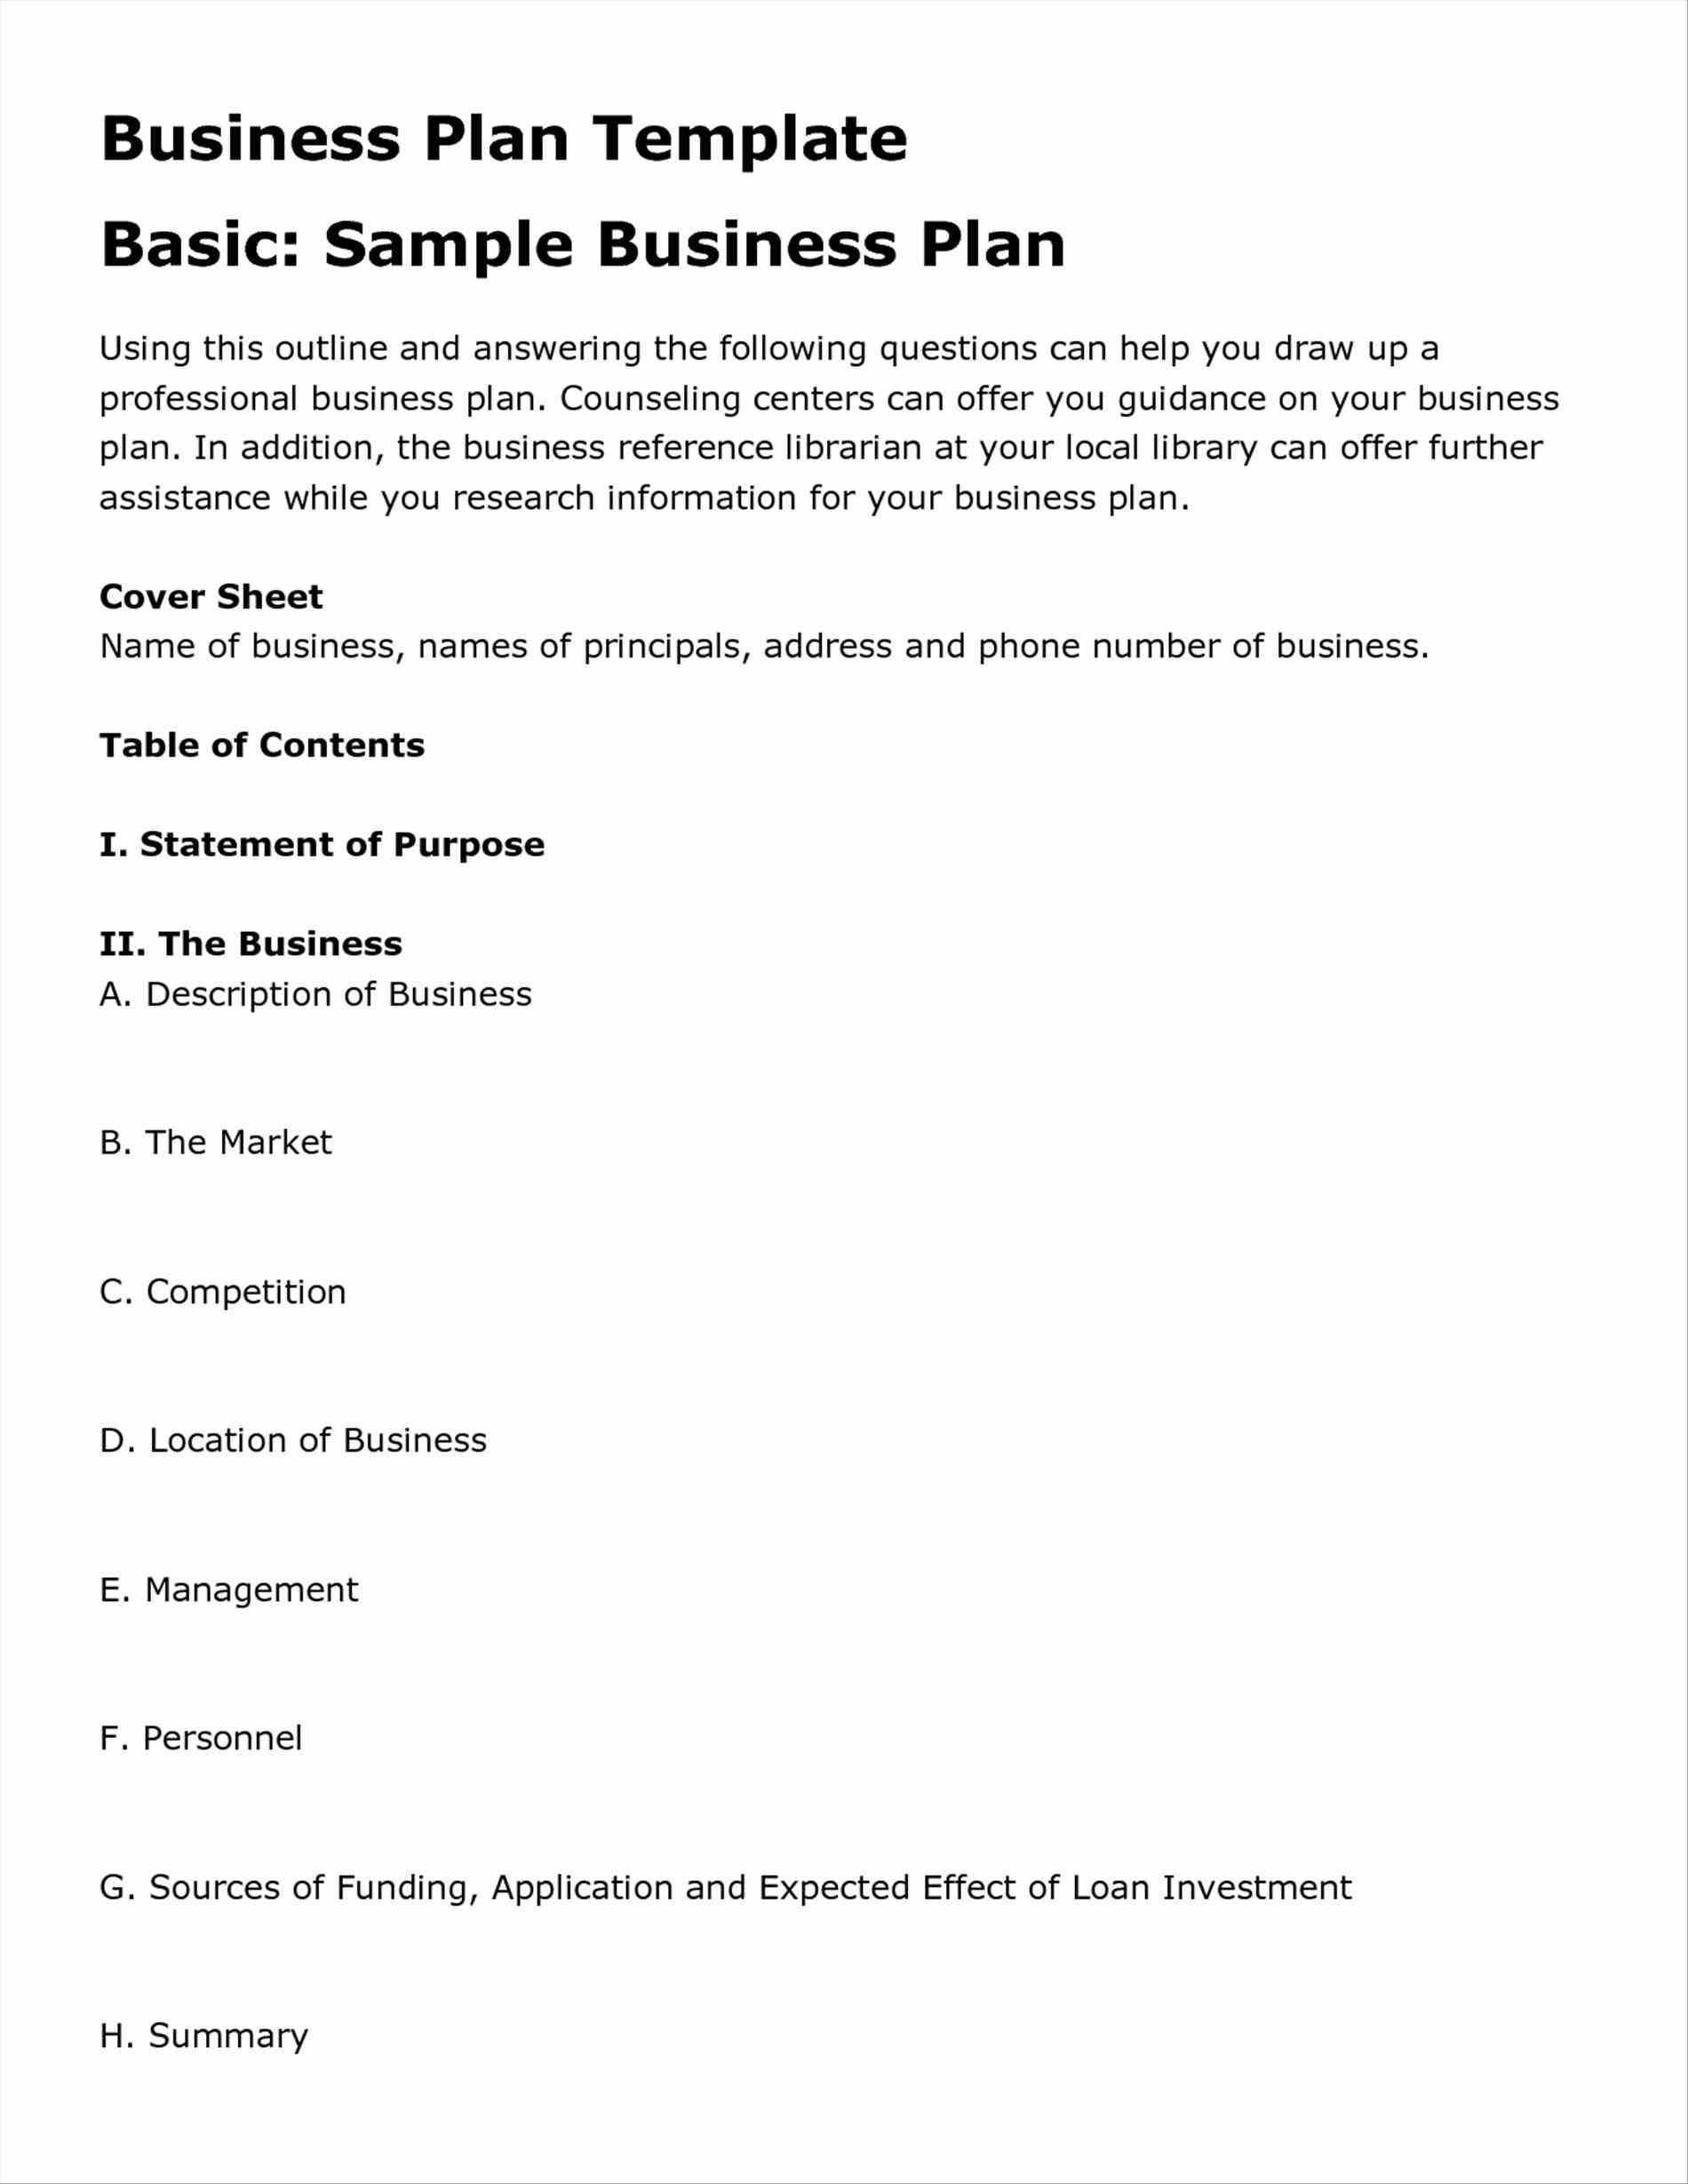 Business Plan Te Restaurant Tes In Word Excel Pdf Free Plans For Free Business Plan Template Australia